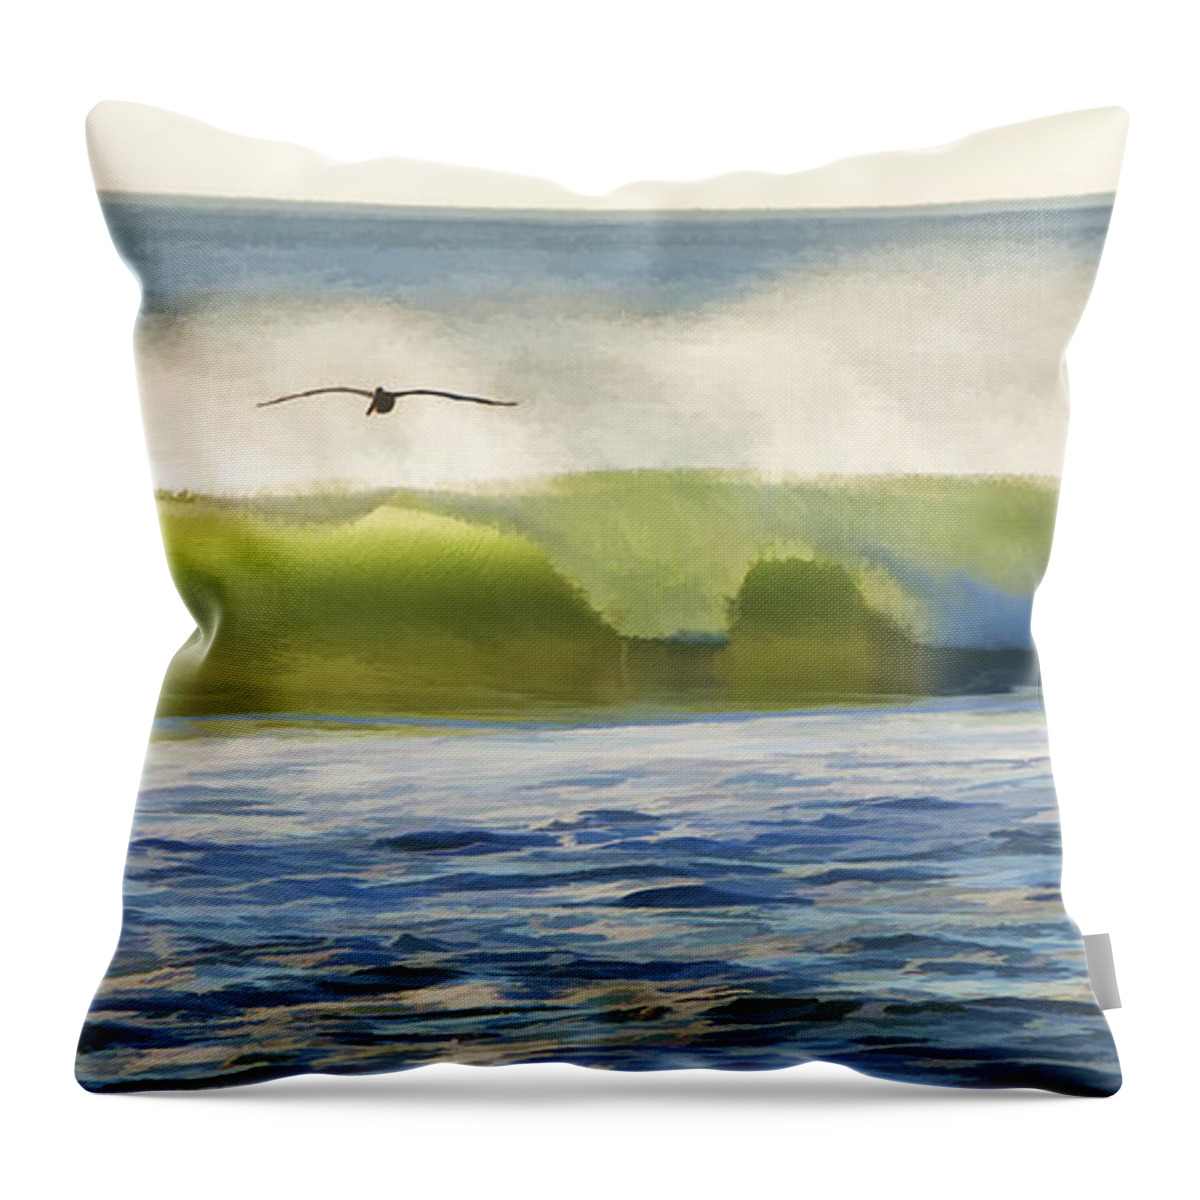 Pelican Throw Pillow featuring the photograph Pelican Flying Over Wind Wave by John A Rodriguez